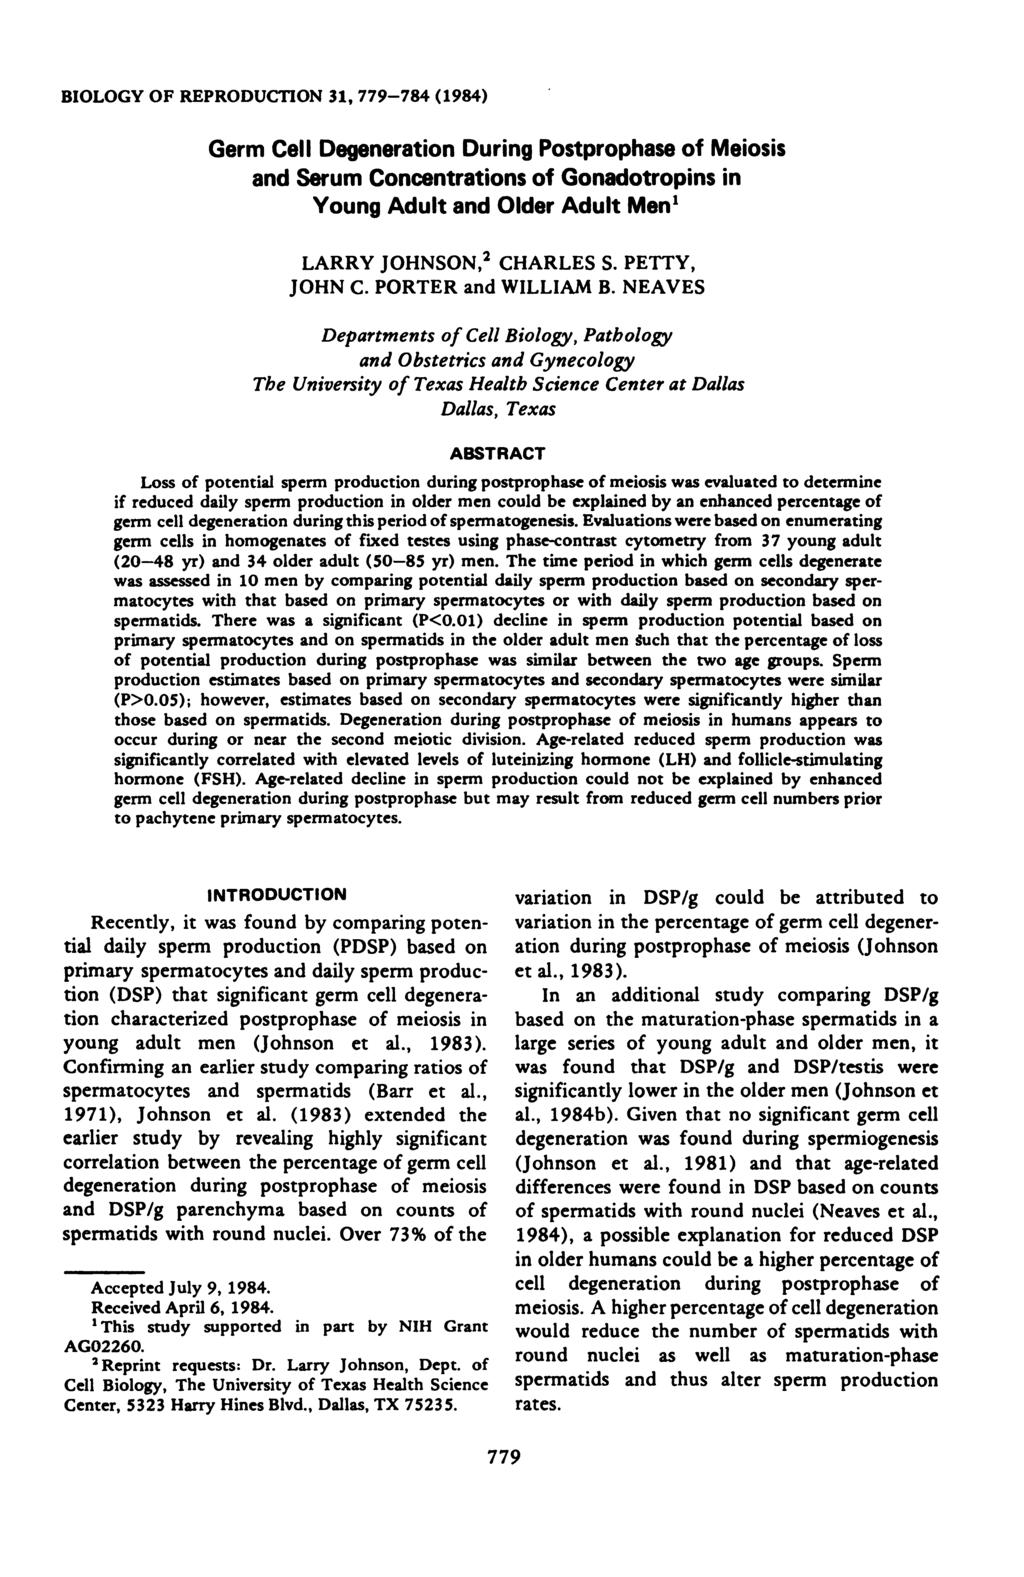 BIOLOGY OF REPRODUCTION 31, 779-784 (1984) Germ Cell Degeneration During Postprophase of Meiosis and Serum Concentrations of Gonadotropins in Young Adult and Older Adult Men LARRY JOHNSON,2 CHARLES S.